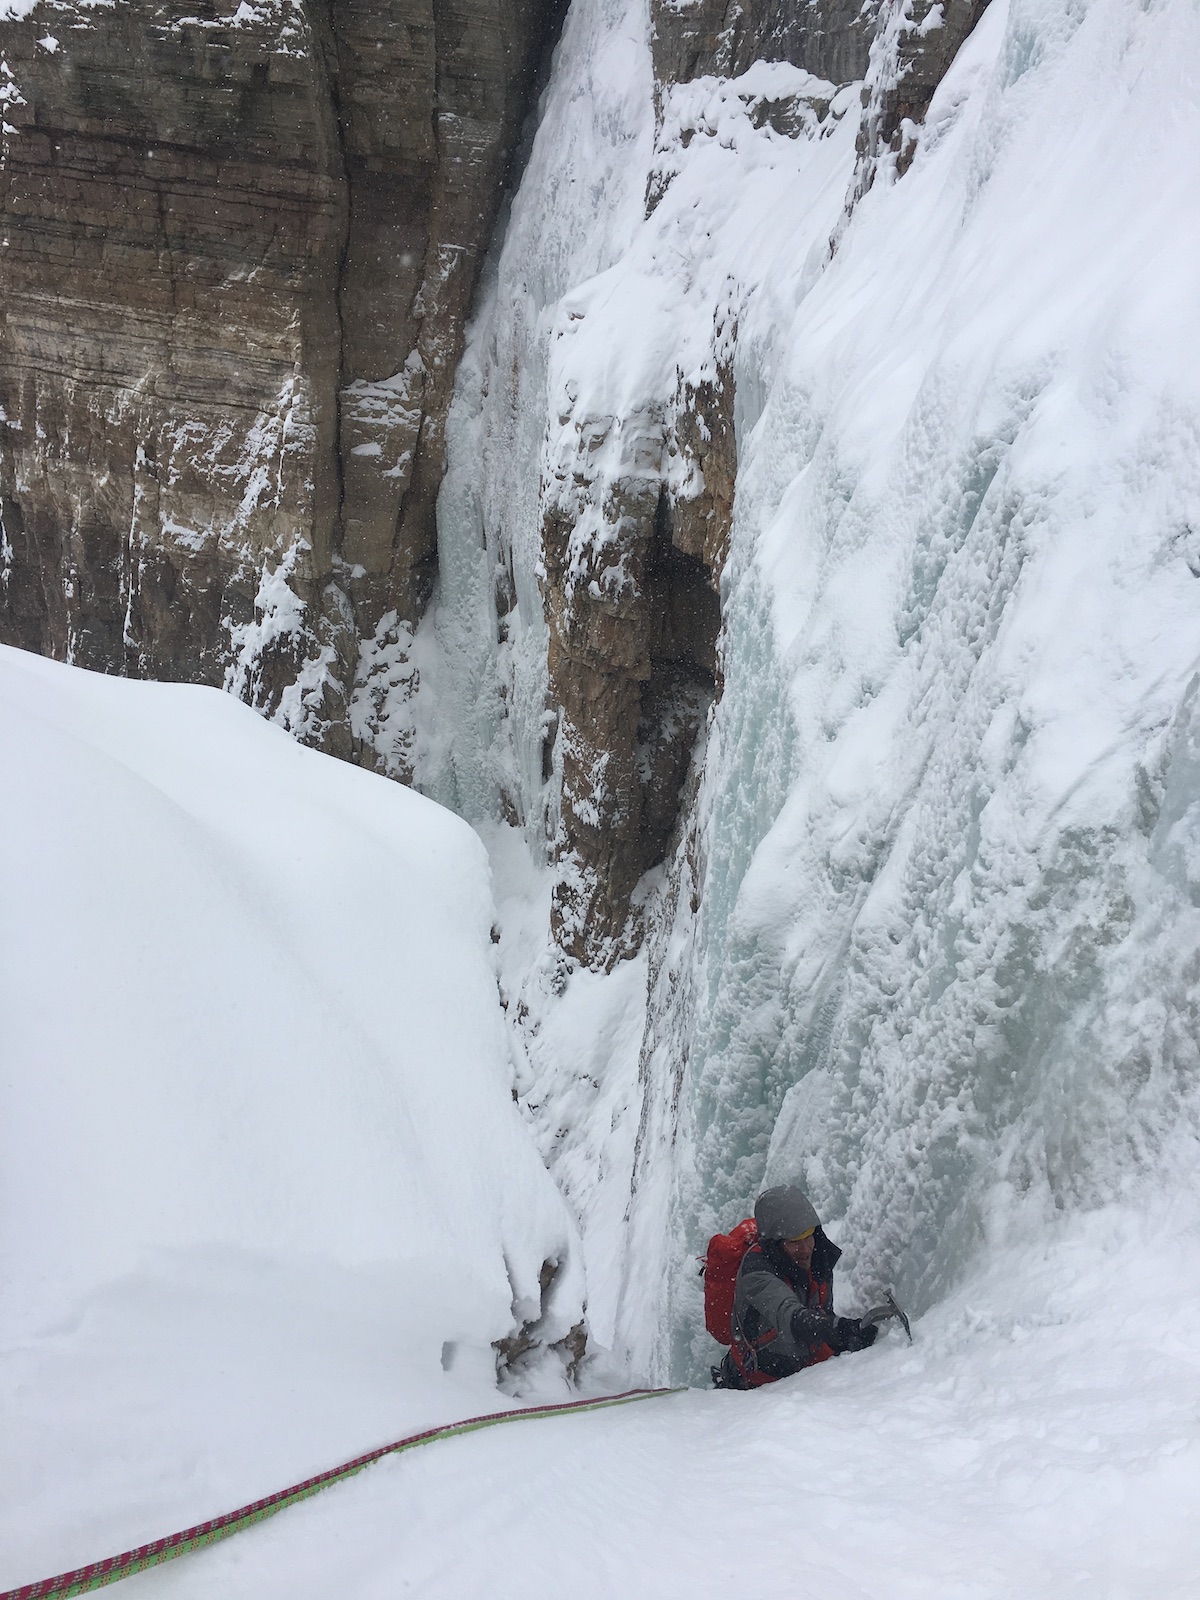 Derek Franz wears the Mountain Equipment Tupilak 30+ on Hidden Falls (WI4, 3 pitches) in Glenwood Canyon on New Years Eve, 2018. [Photo] Craig Helm